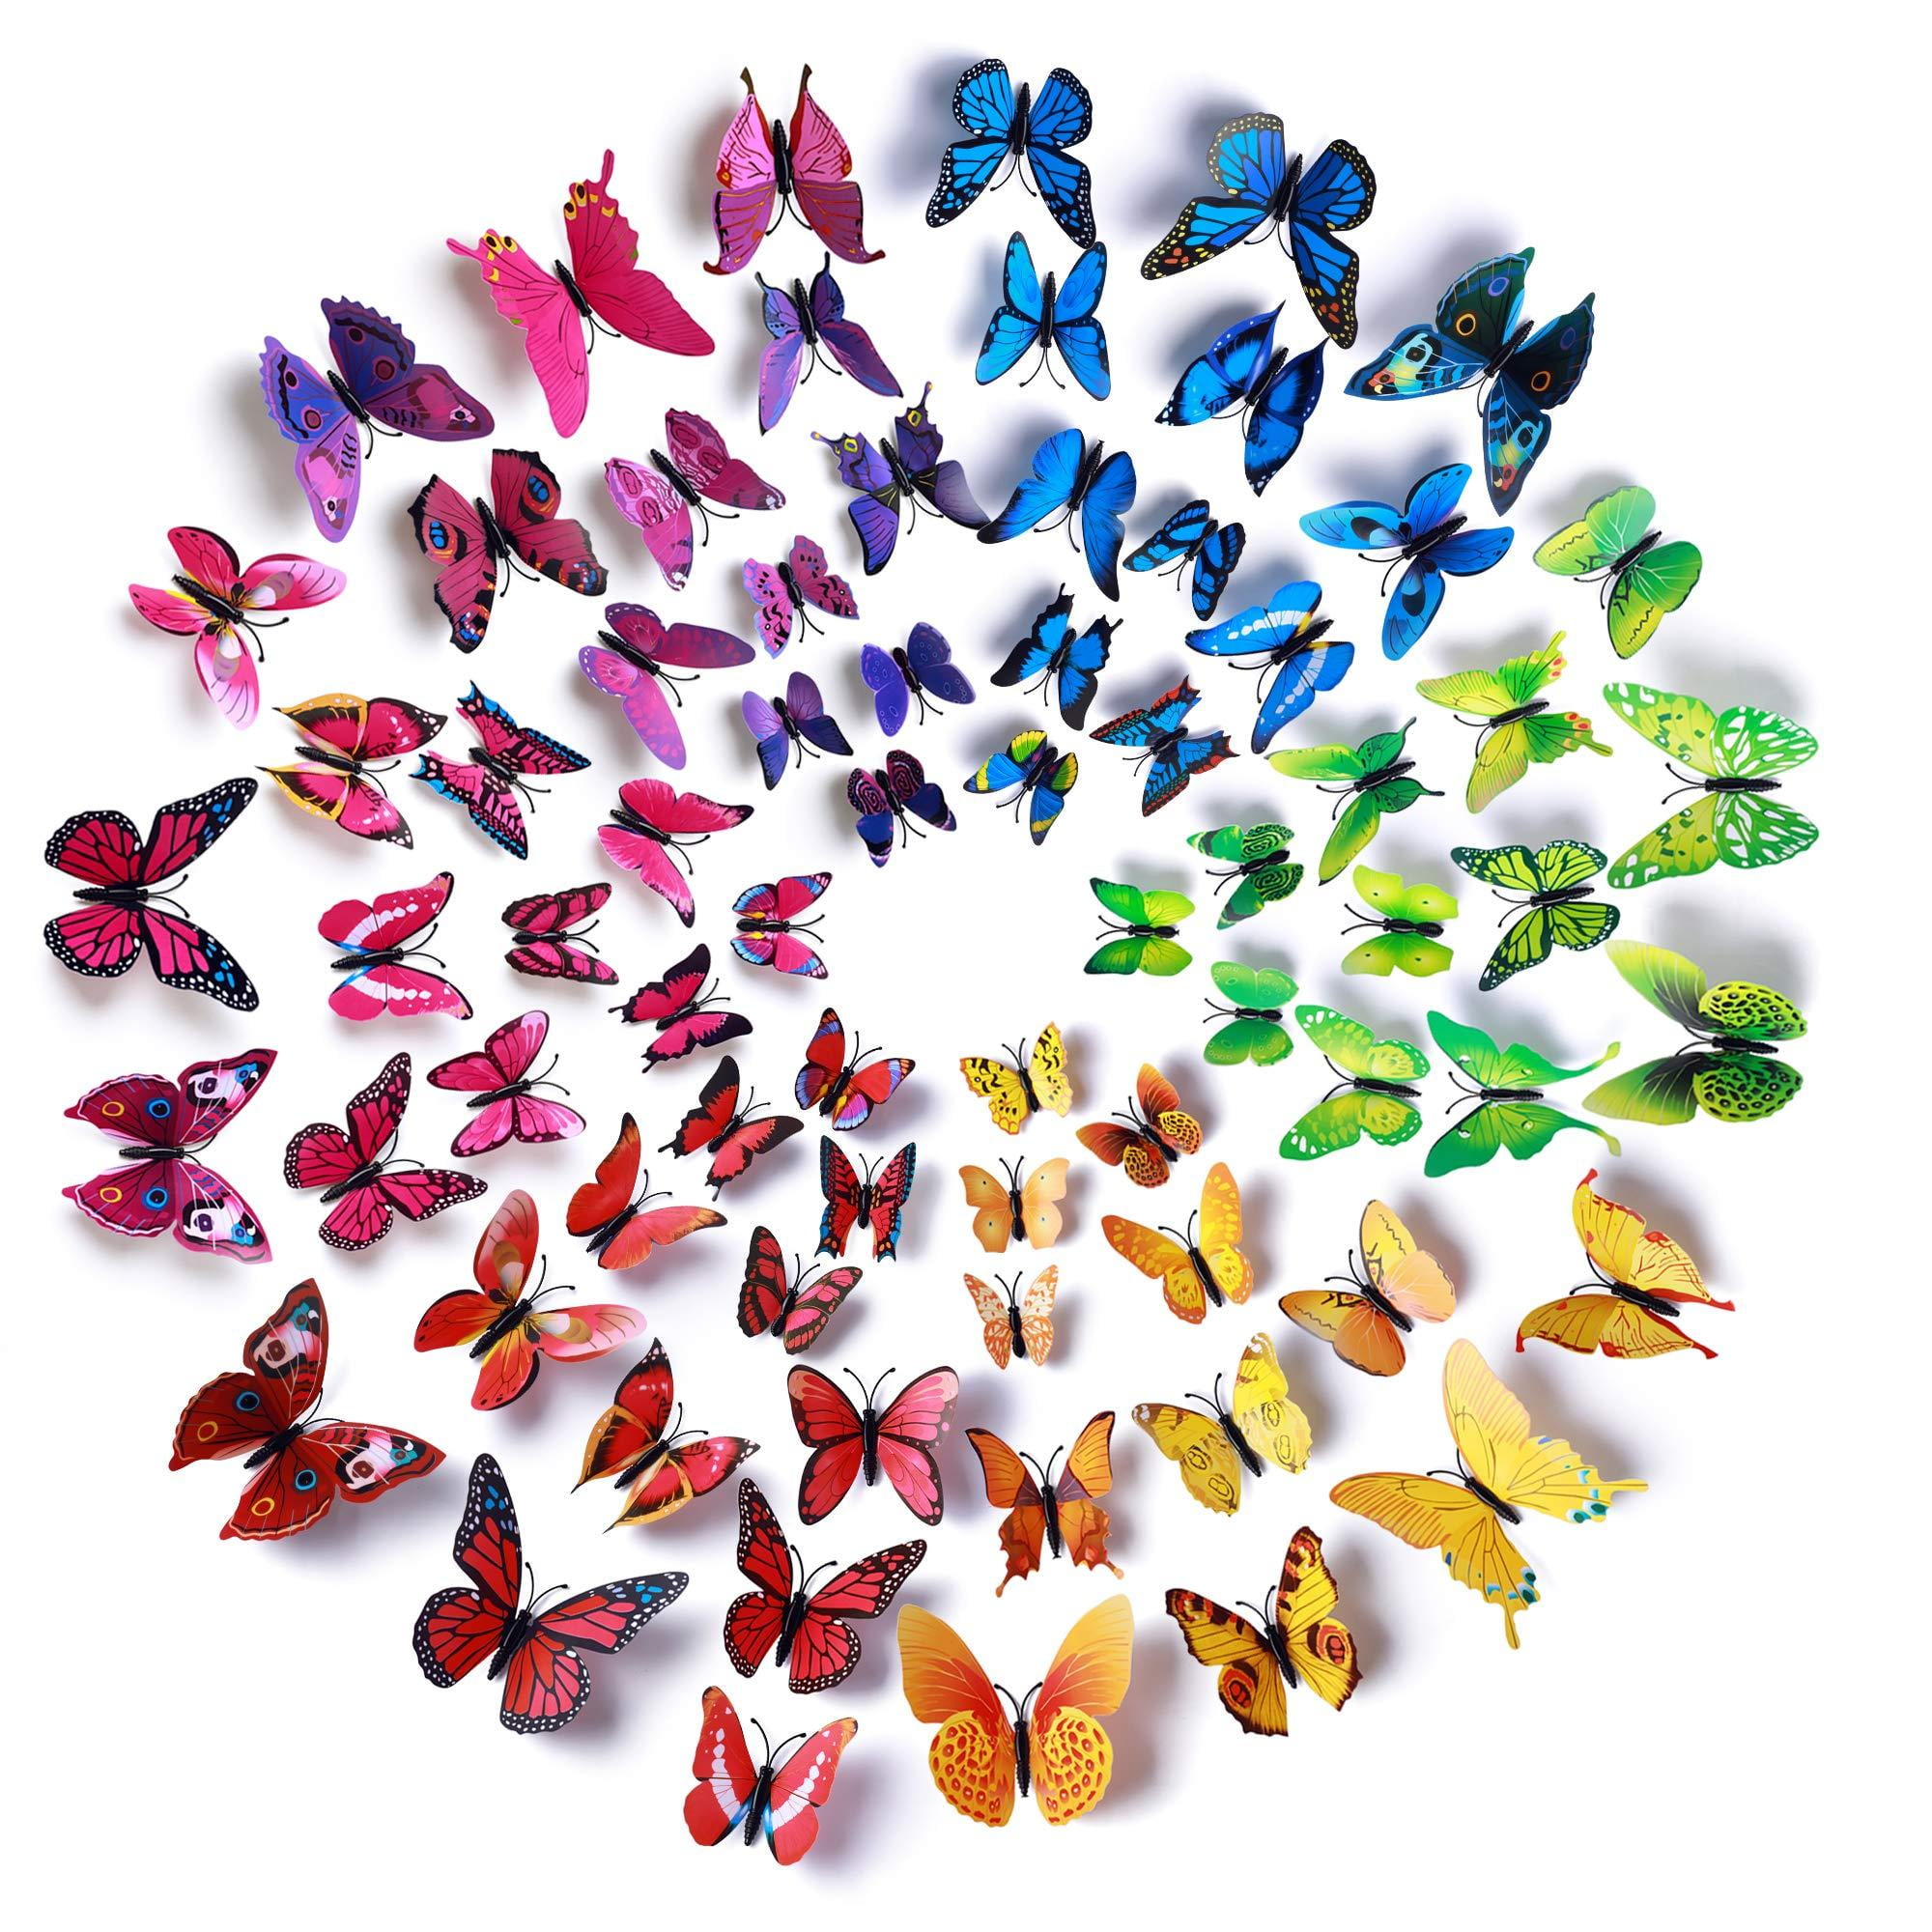 Colorful MAG Butterfly Decal Wall Stickers Home DIY Art Decor Home Children Room 